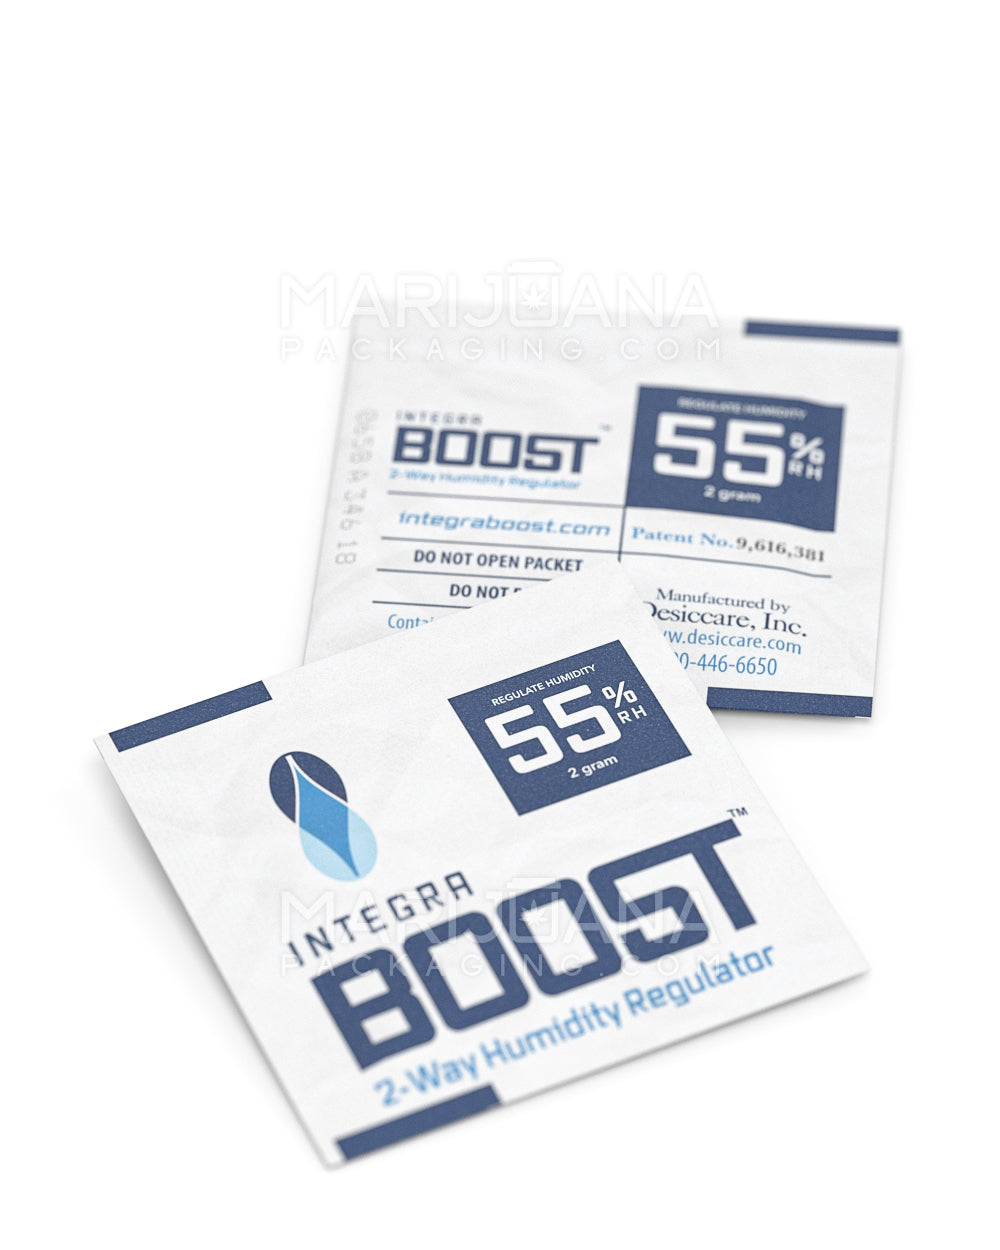 INTEGRA | Boost Humidity Pack | 2 Grams - 55% - 100 Count - 5